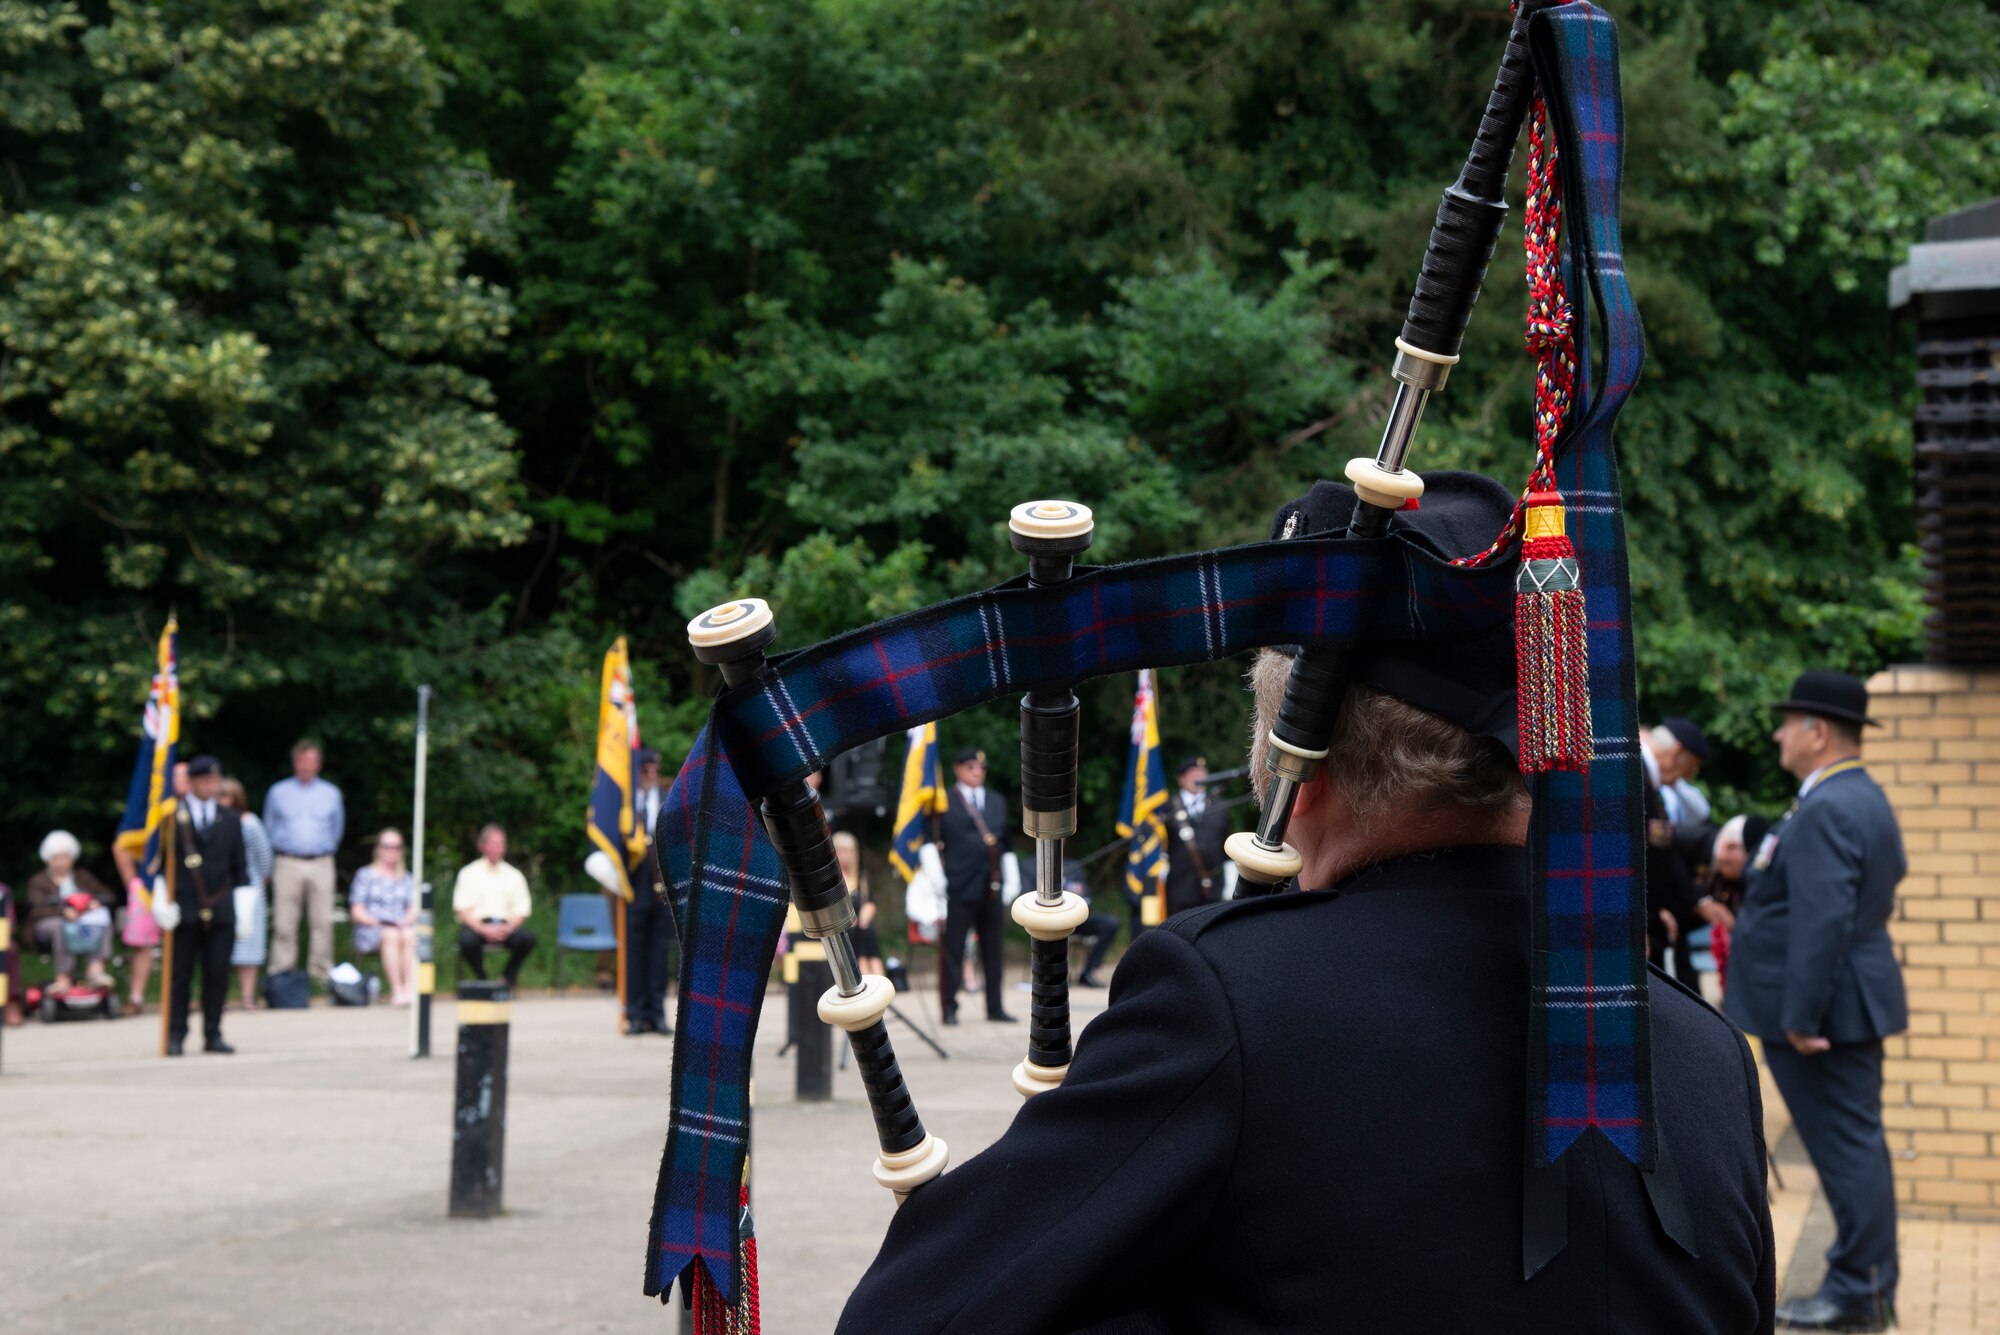 A bagpiper plays at the Desert Rats memorial in High Ash, Thetford Forest, England, July 11, 2021. Bagpipes were played before the 7th Armoured Division Desert Rats memorial prior to the U.S. Honor Guard members arrival to commemorate soldiers from the division who had fallen during World War II.  (U.S. Air Force photo by 1st Lt. Tyler Whiting)